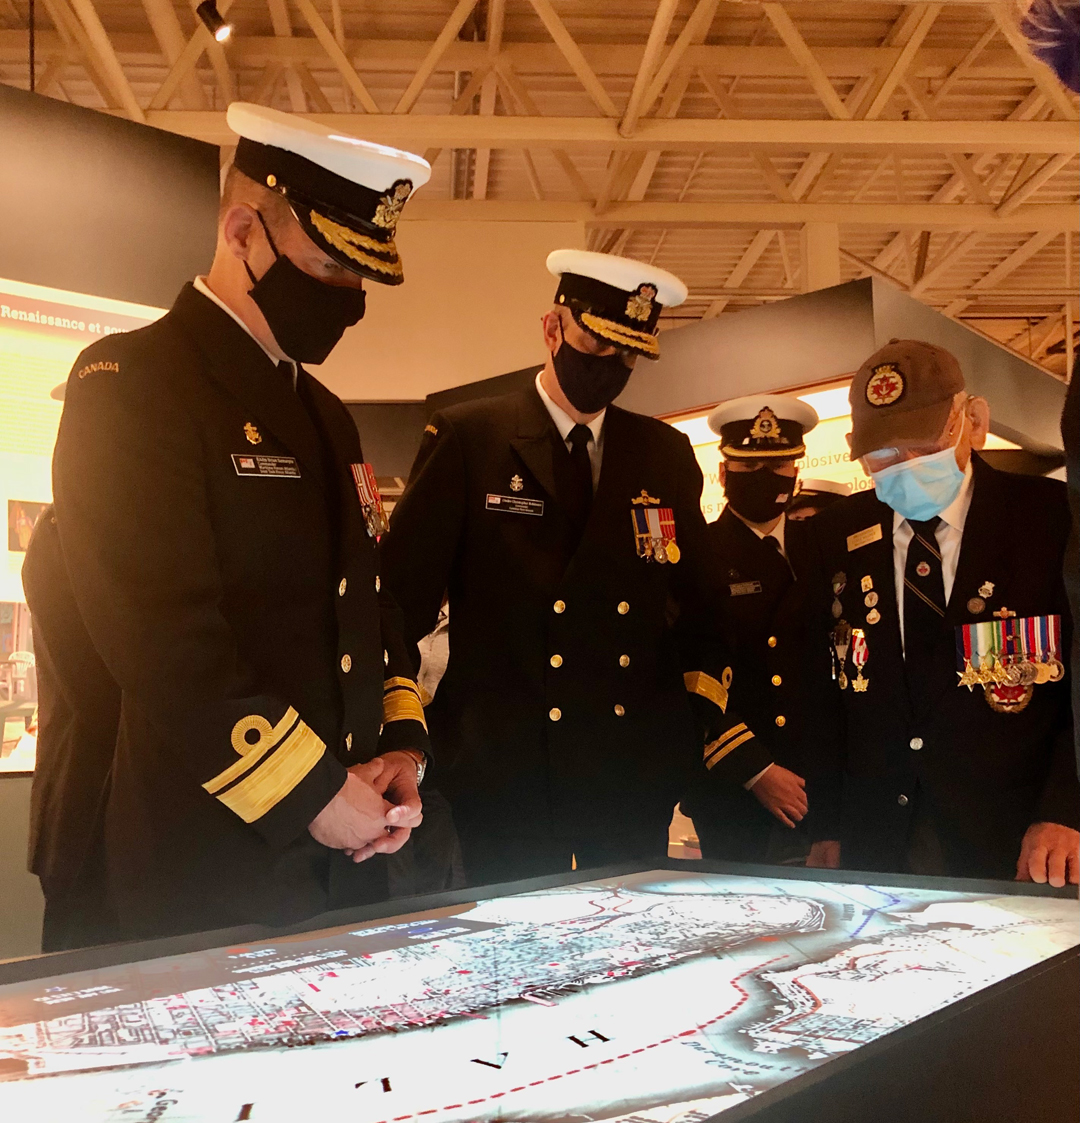 From left: Cmdre Christopher Robson, Commander Canadian Fleet Atlantic; RAdm Brian Santarpia, Commander Maritime Forces Atlantic; Capt (Retired) Earle Wagner, Merchant Navy veteran; and Roger Marsters, curator of Marine History at the Maritime Museum of the Atlantic. Photo by Joanie Veitch